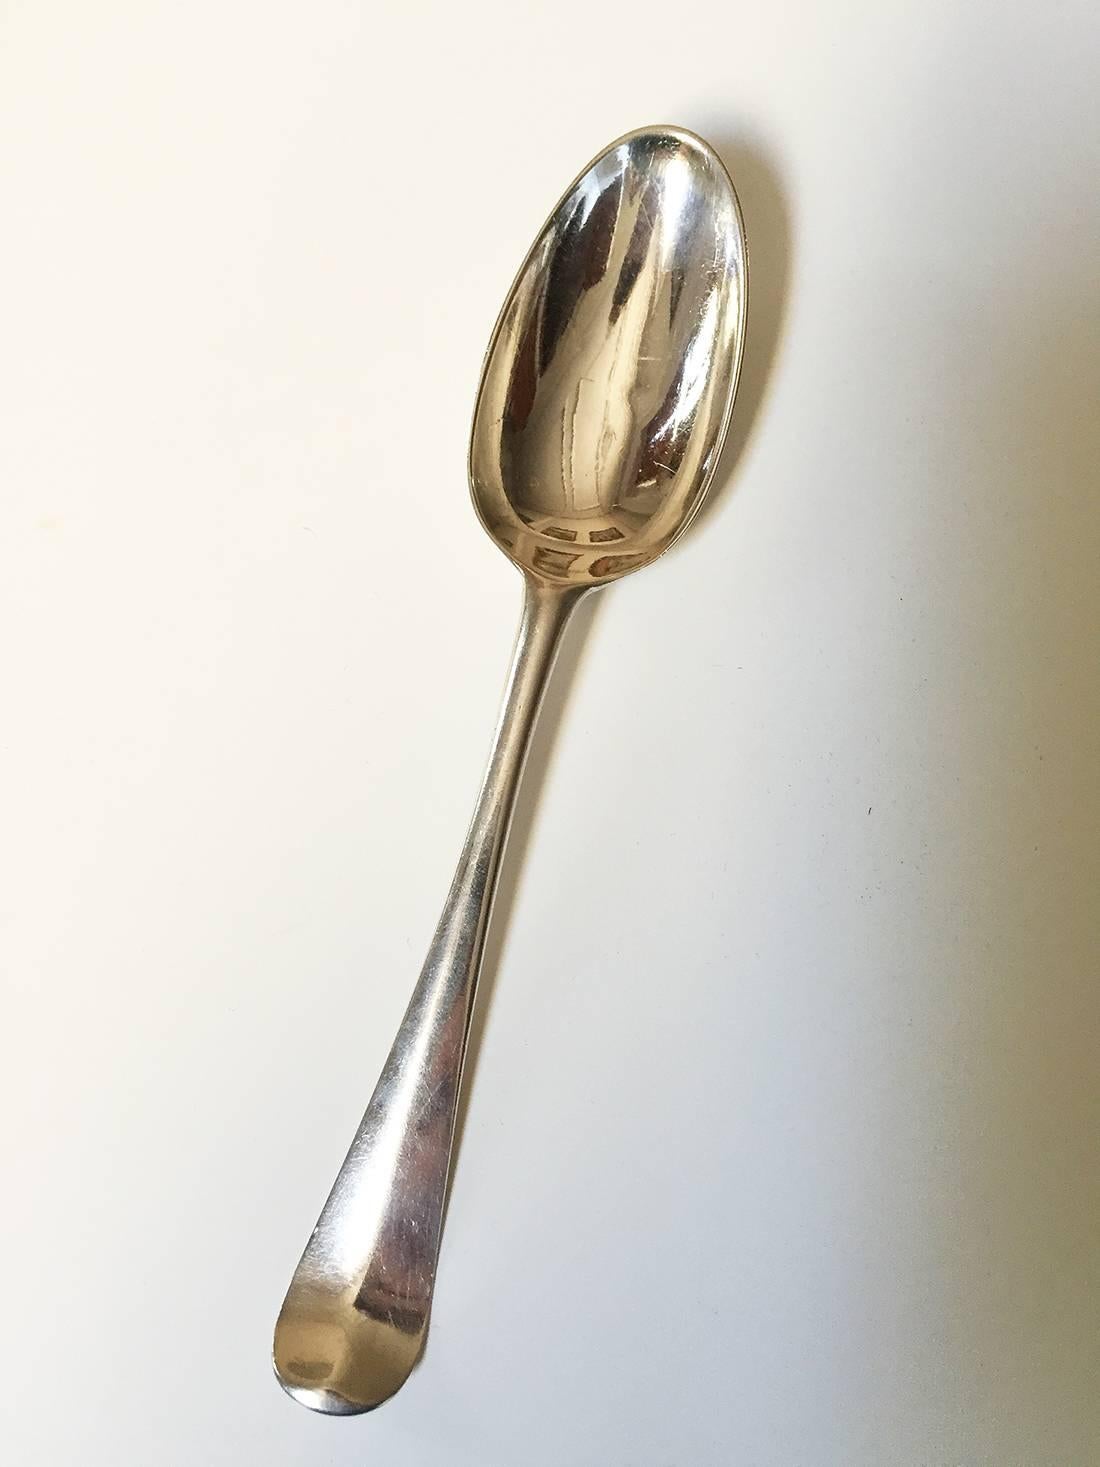 English George I set of ten Britannia silver spoons, with the maker's mark of London silversmith Isaac Davenport, 1719, London 1719; a Britannia silver spoon made in 1720 (indistinct mark) and a Britannia silver spoon of similar period with